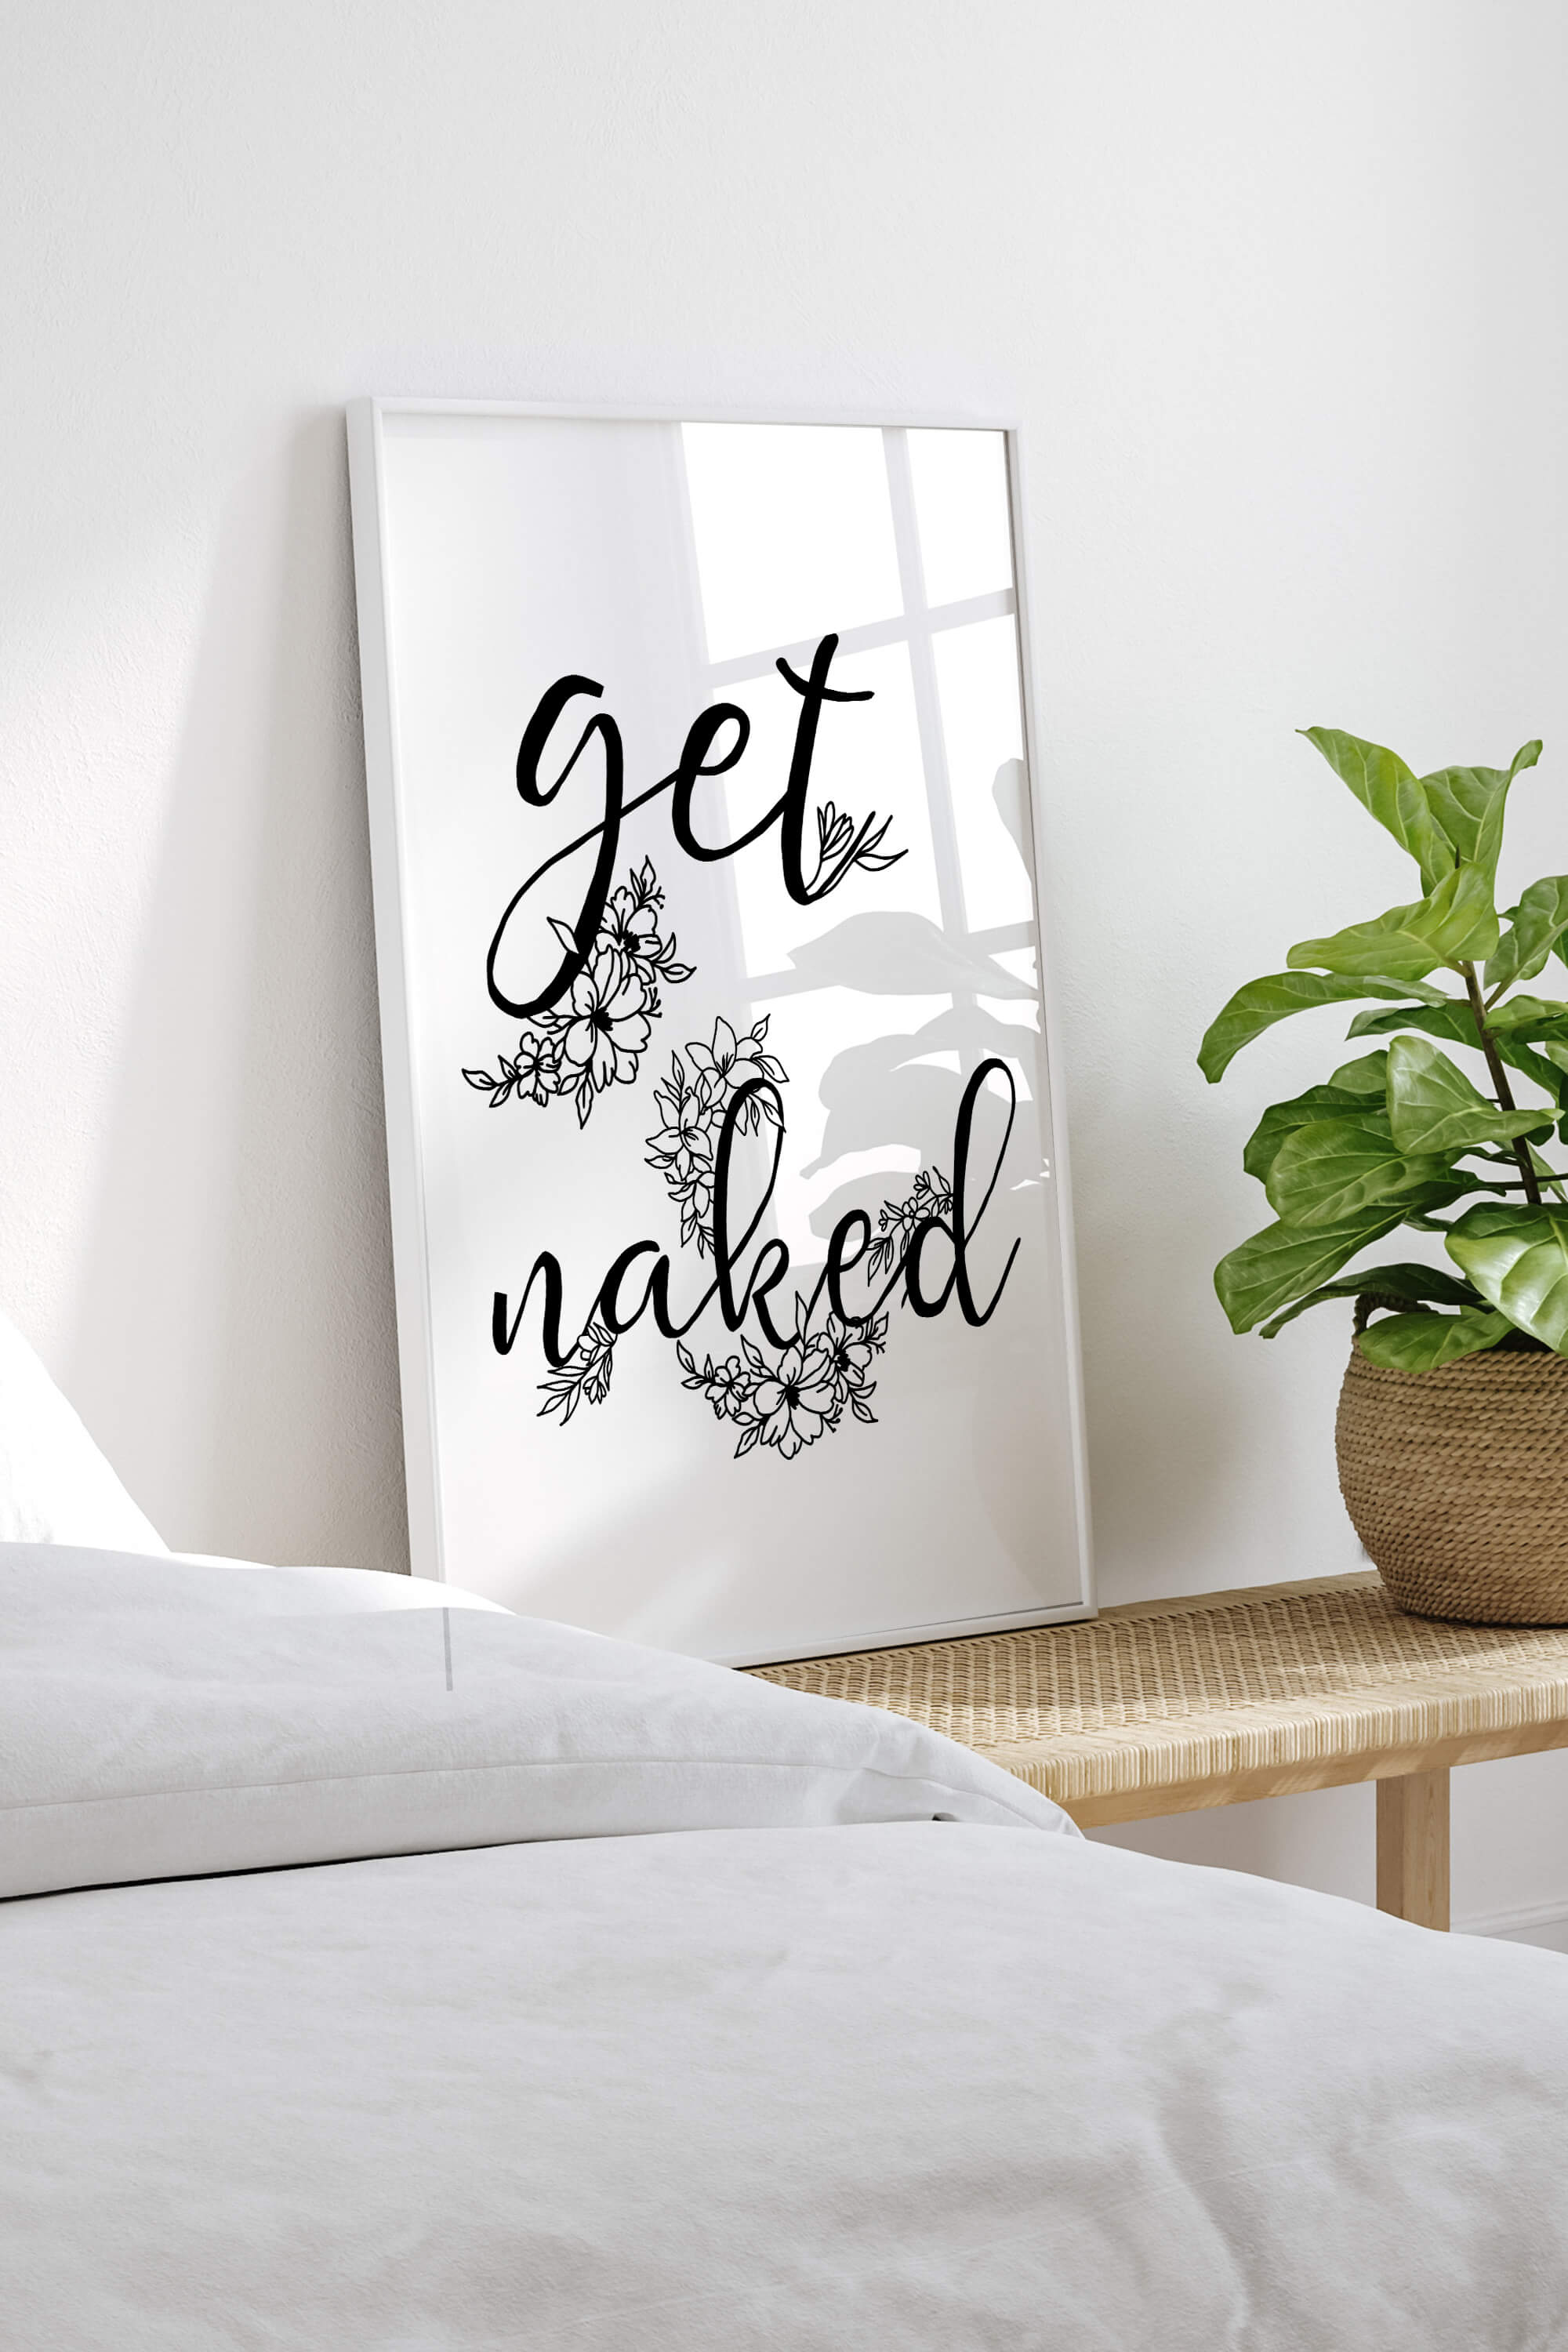 Bold black and white poster featuring a motivational quote amidst intricate floral elements. Make a statement with this unique and inspiring artwork.